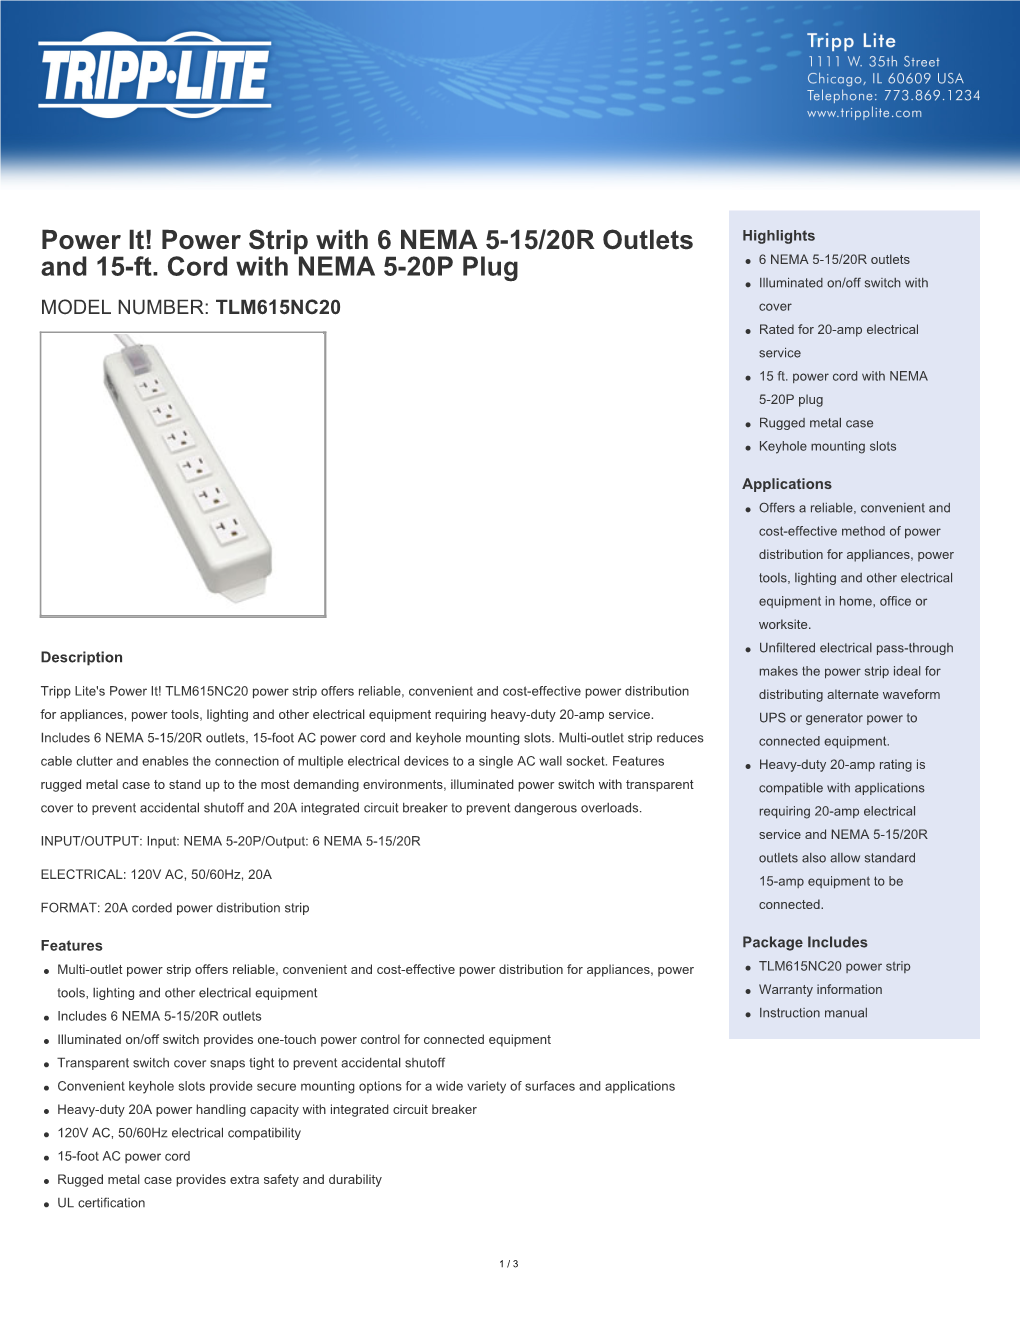 Power It! Power Strip with 6 NEMA 5-15/20R Outlets and 15-Ft. Cord